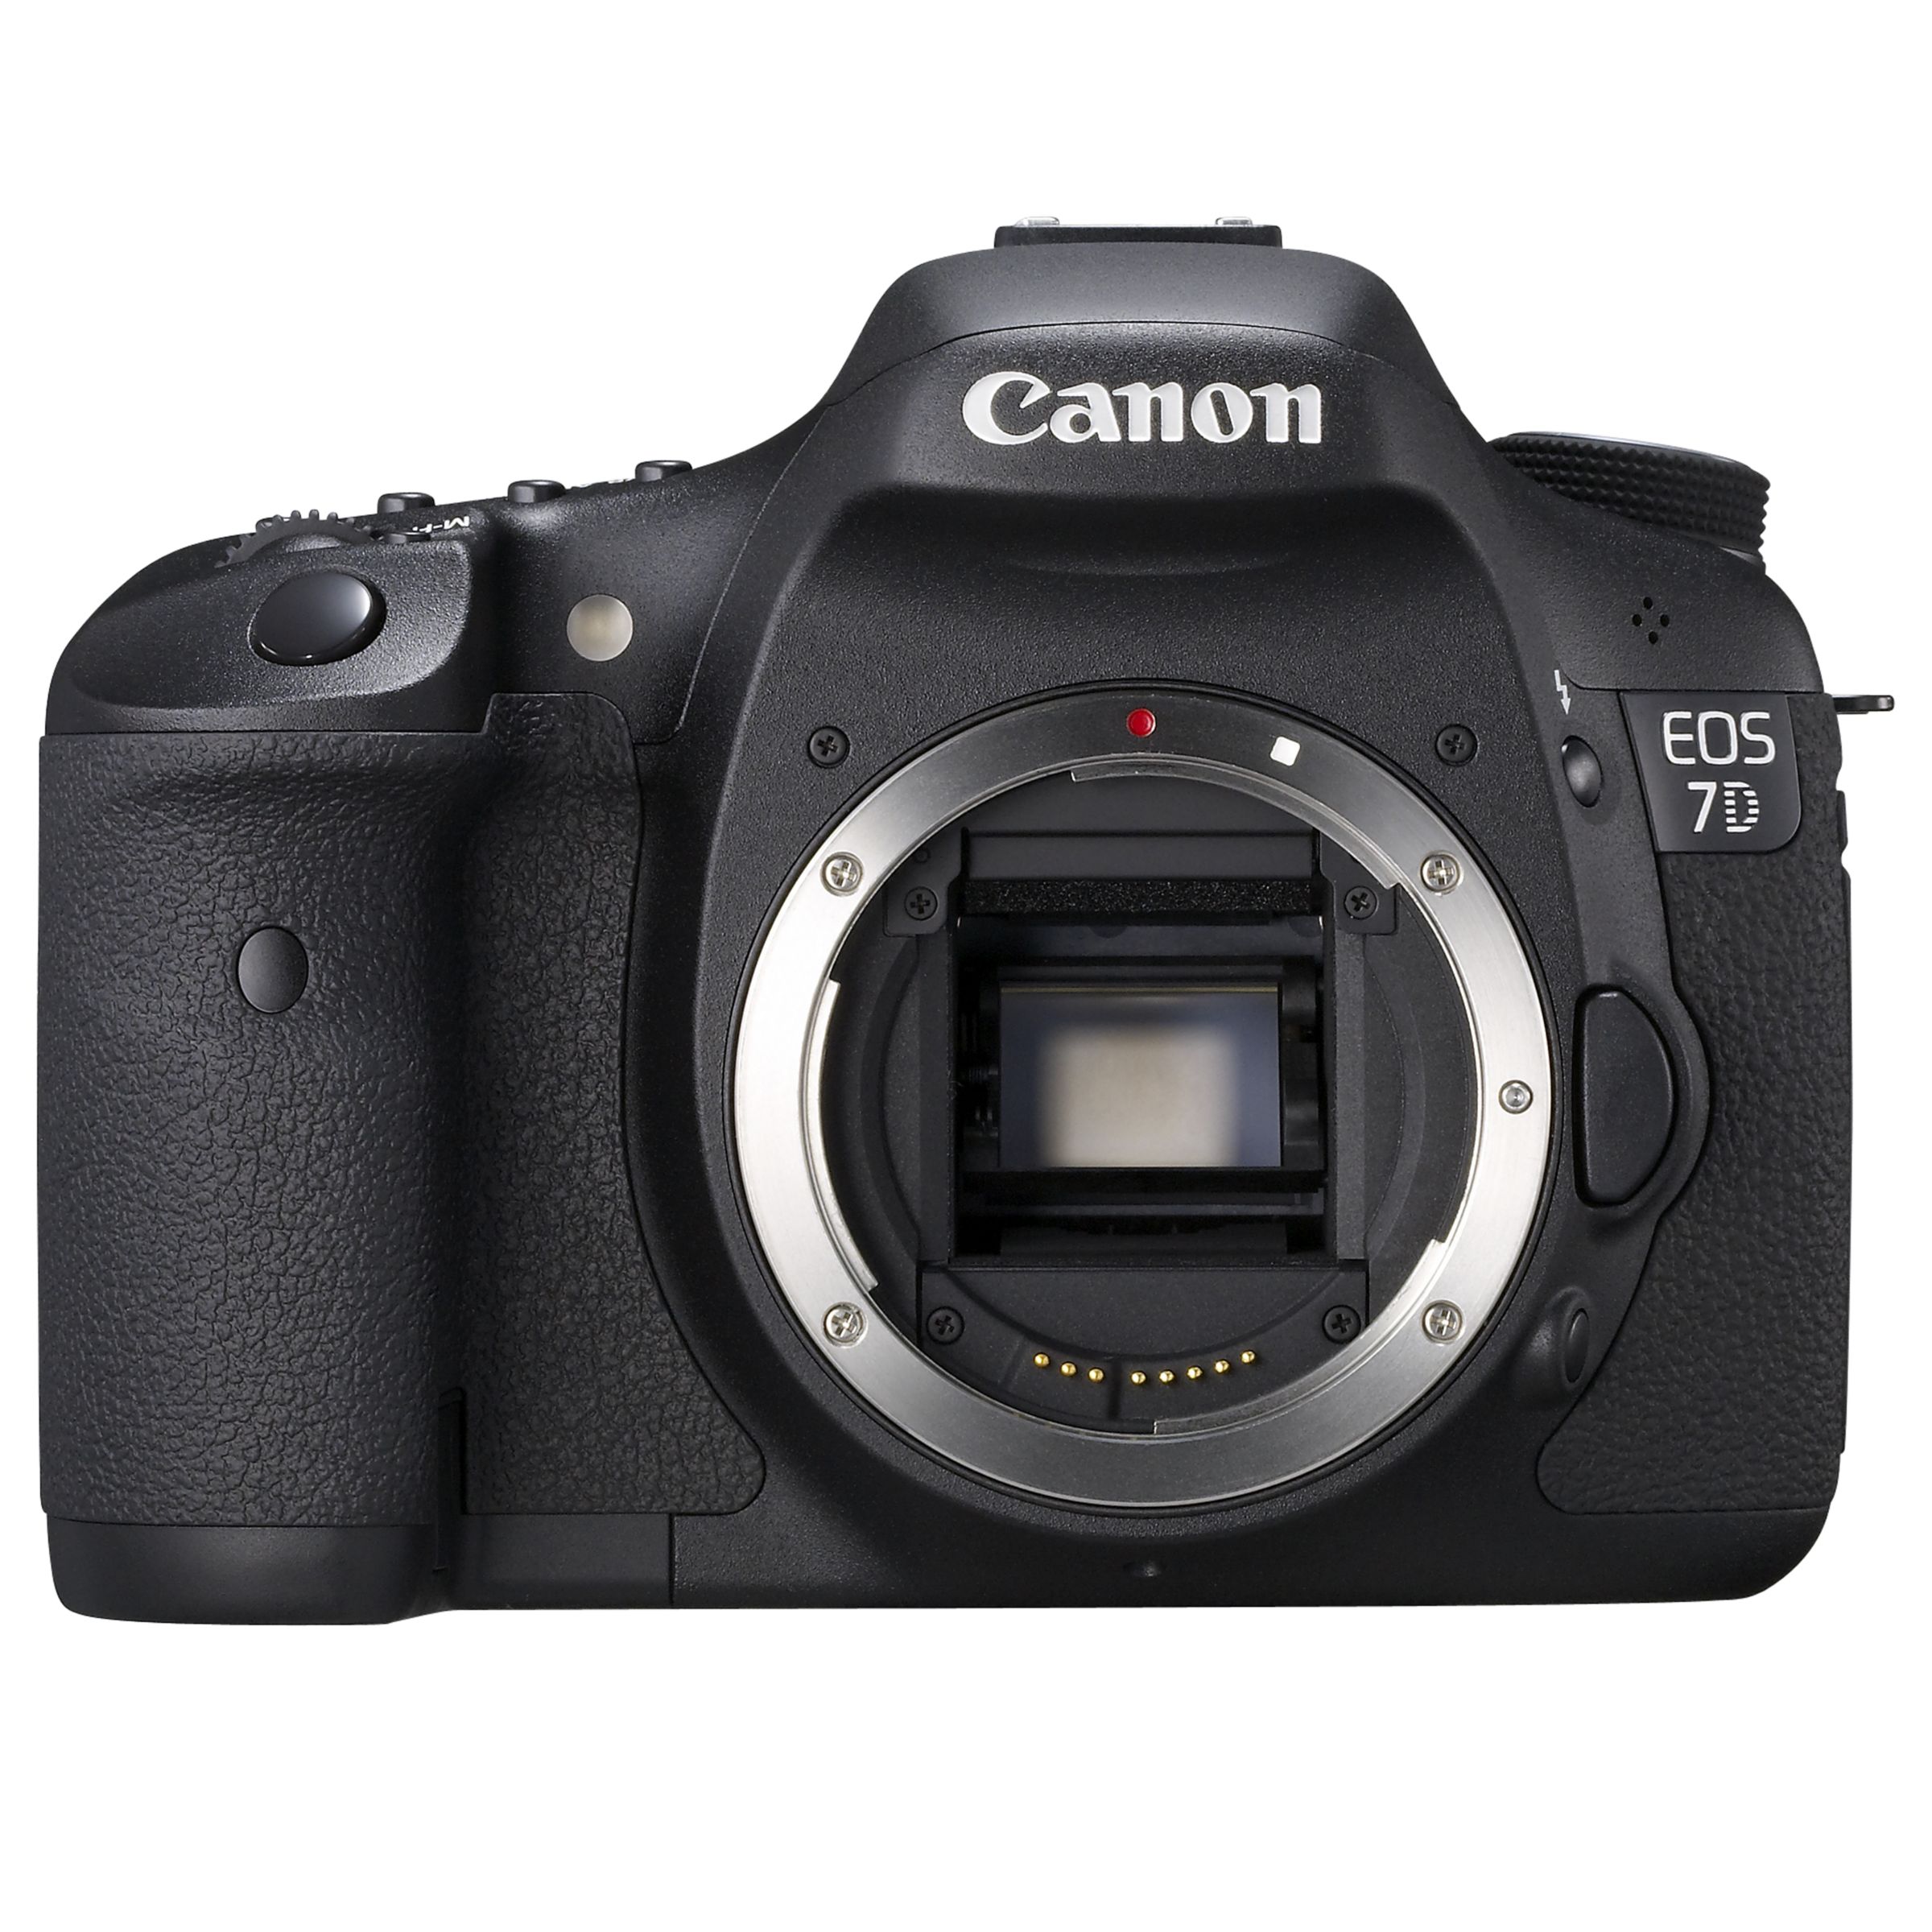 Canon EOS 7D Digital SLR Camera, Body Only at John Lewis